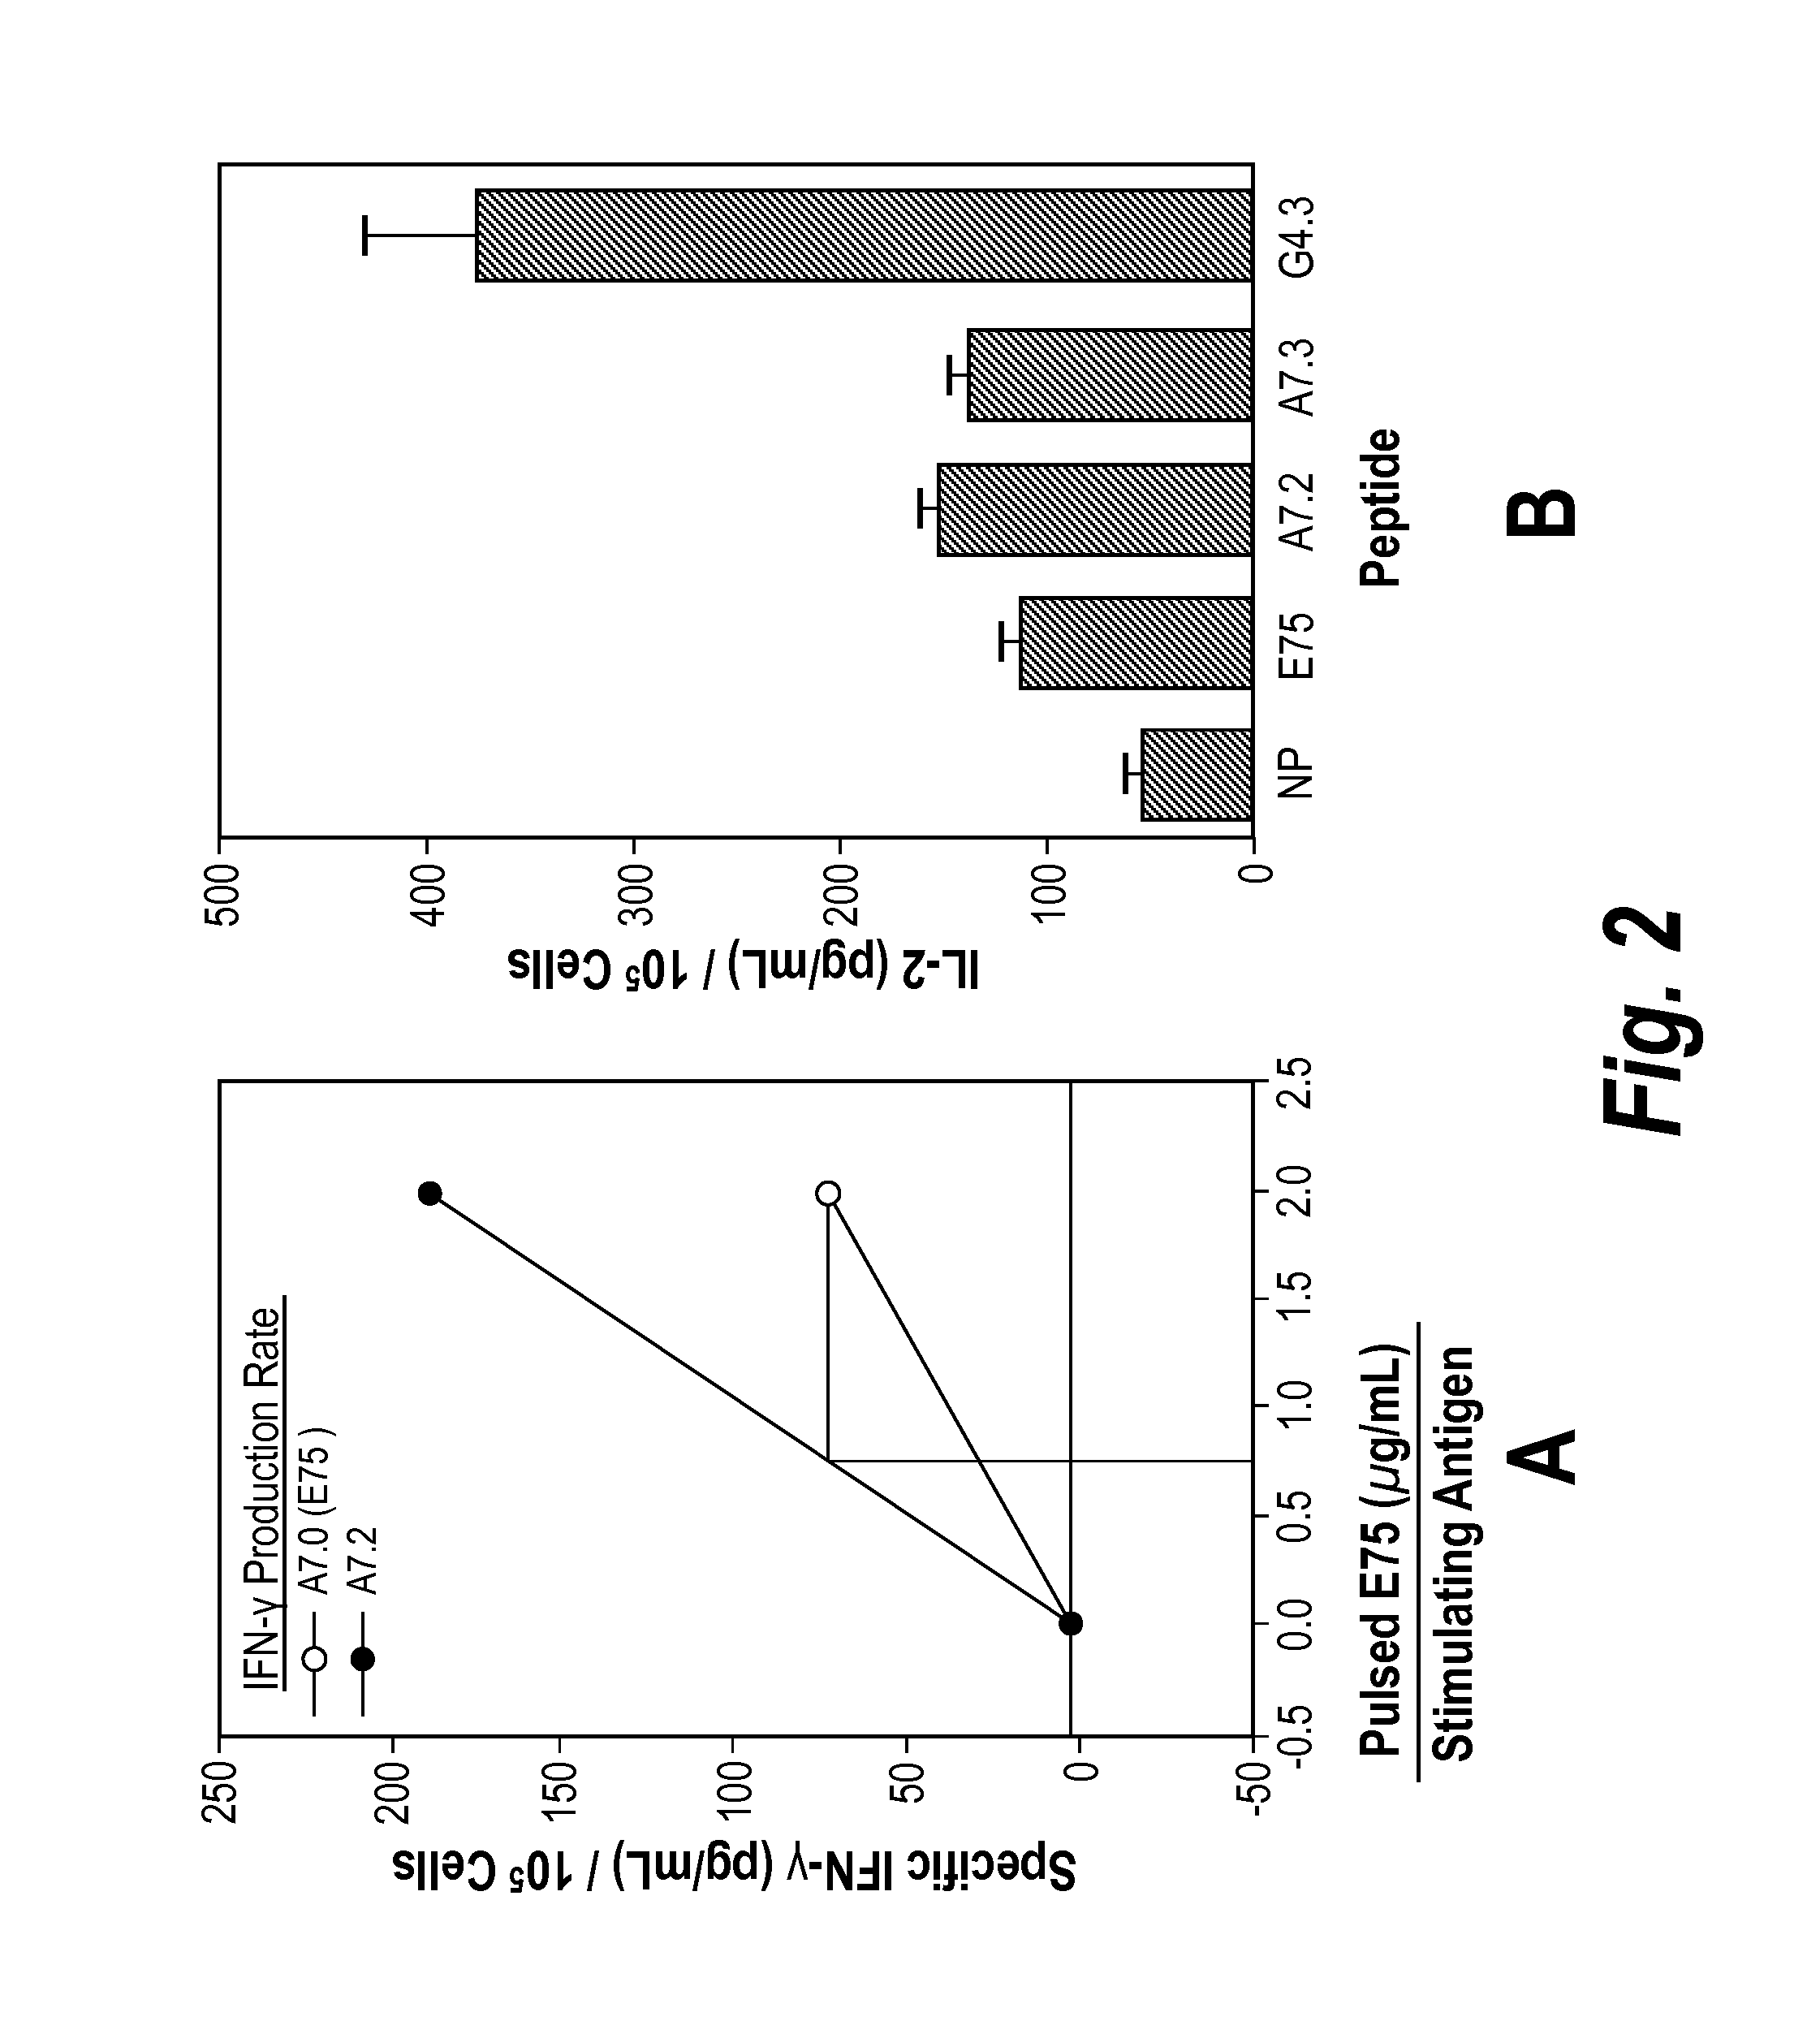 Controlled modulation of amino acid side chain length of peptide antigens